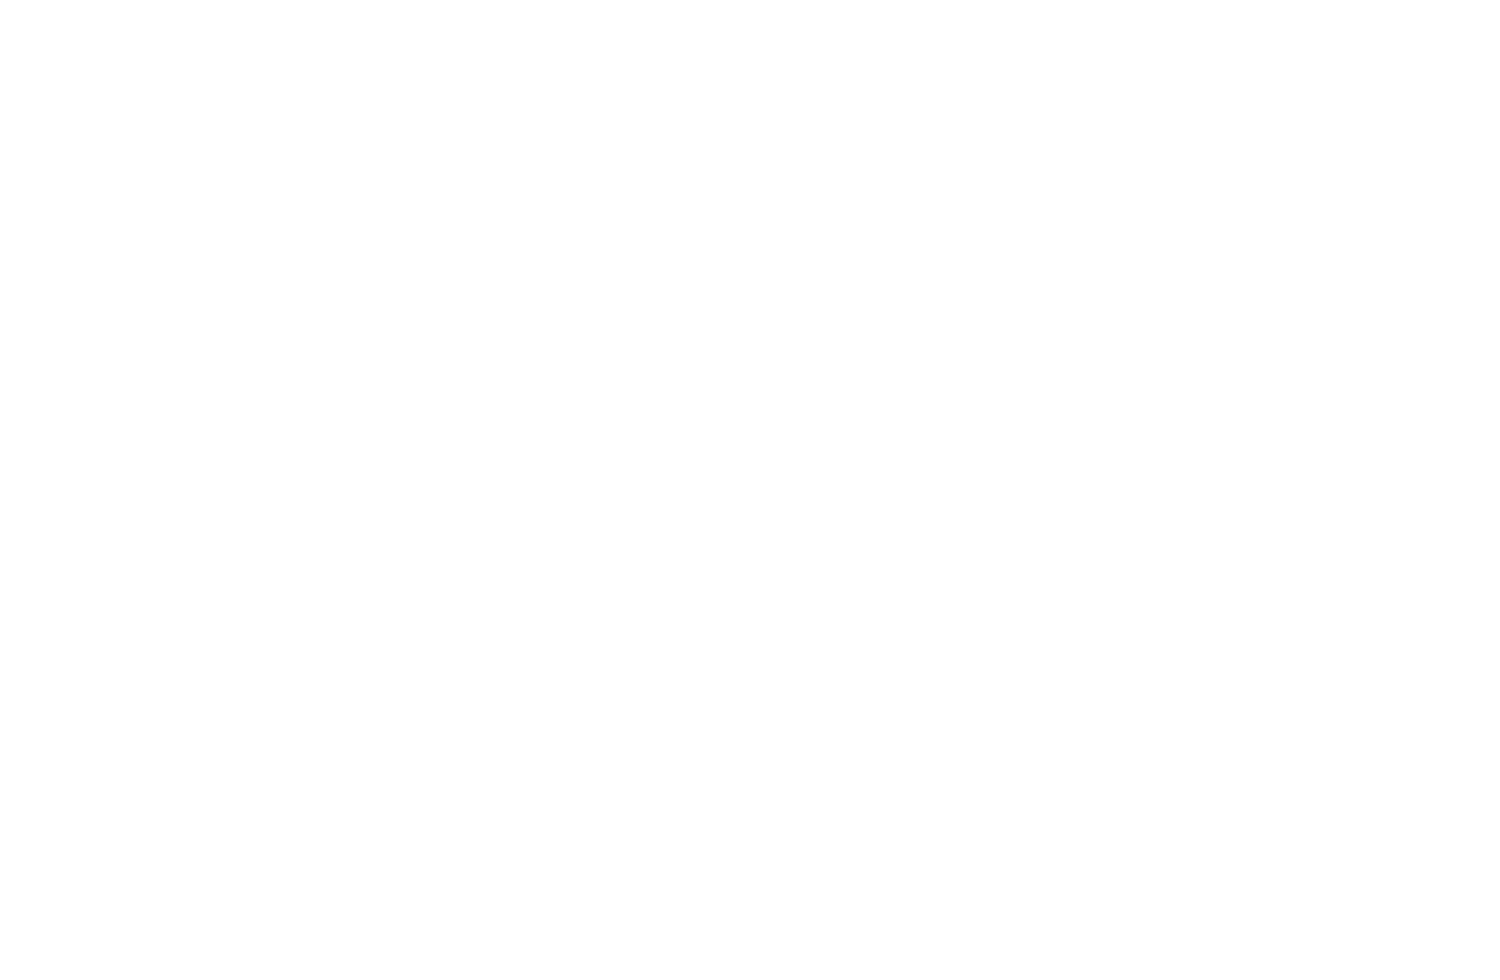 BV Music Productions